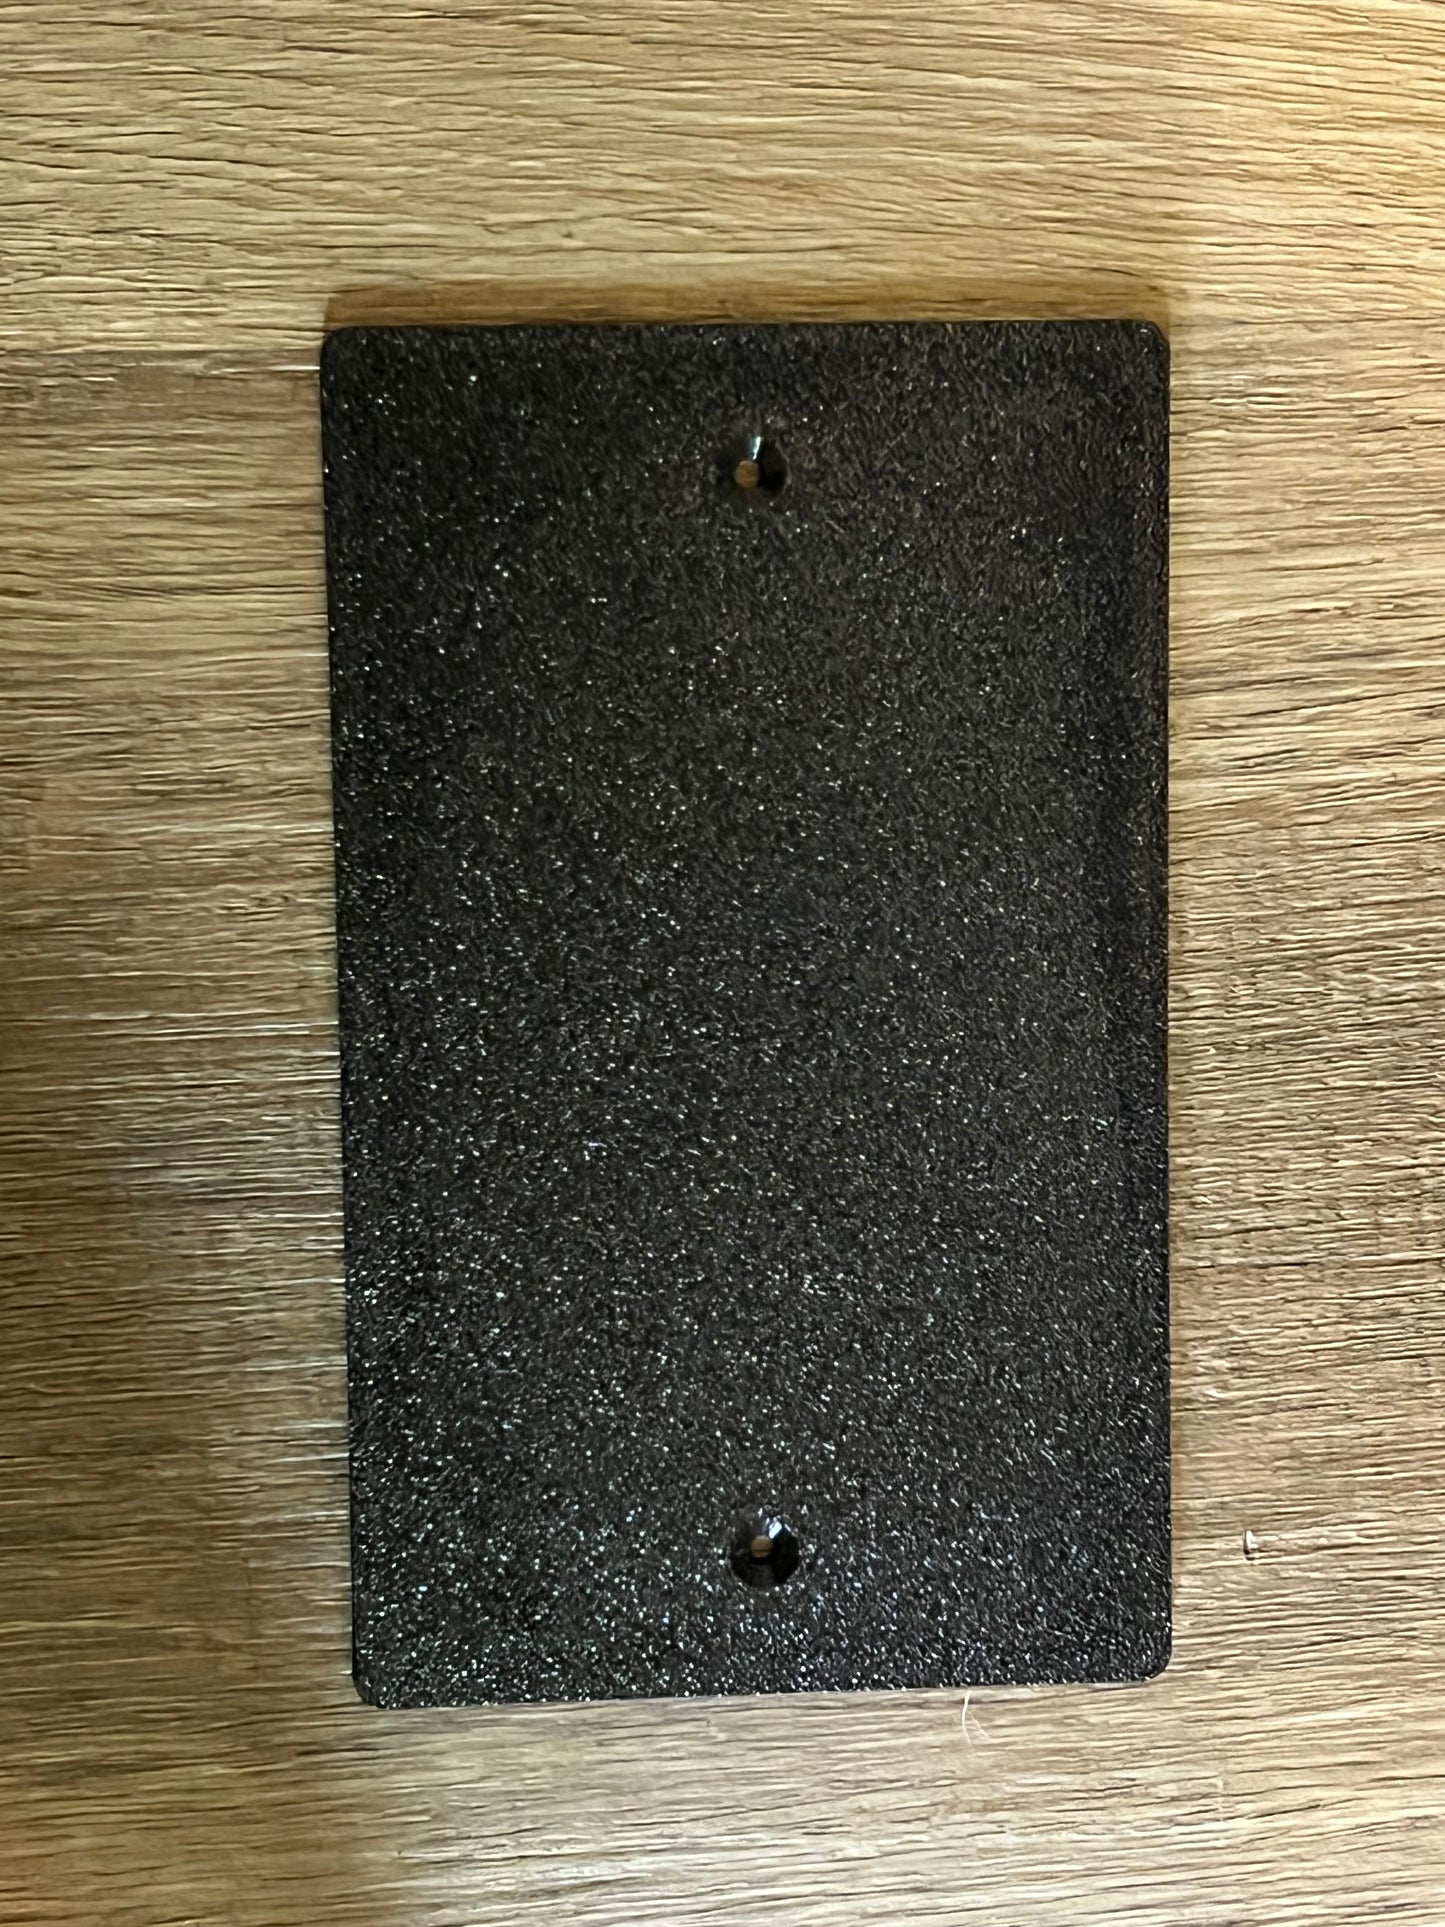 Intercom Cover Plate for Use With Doorbell Mounts - Customizable for different sizes